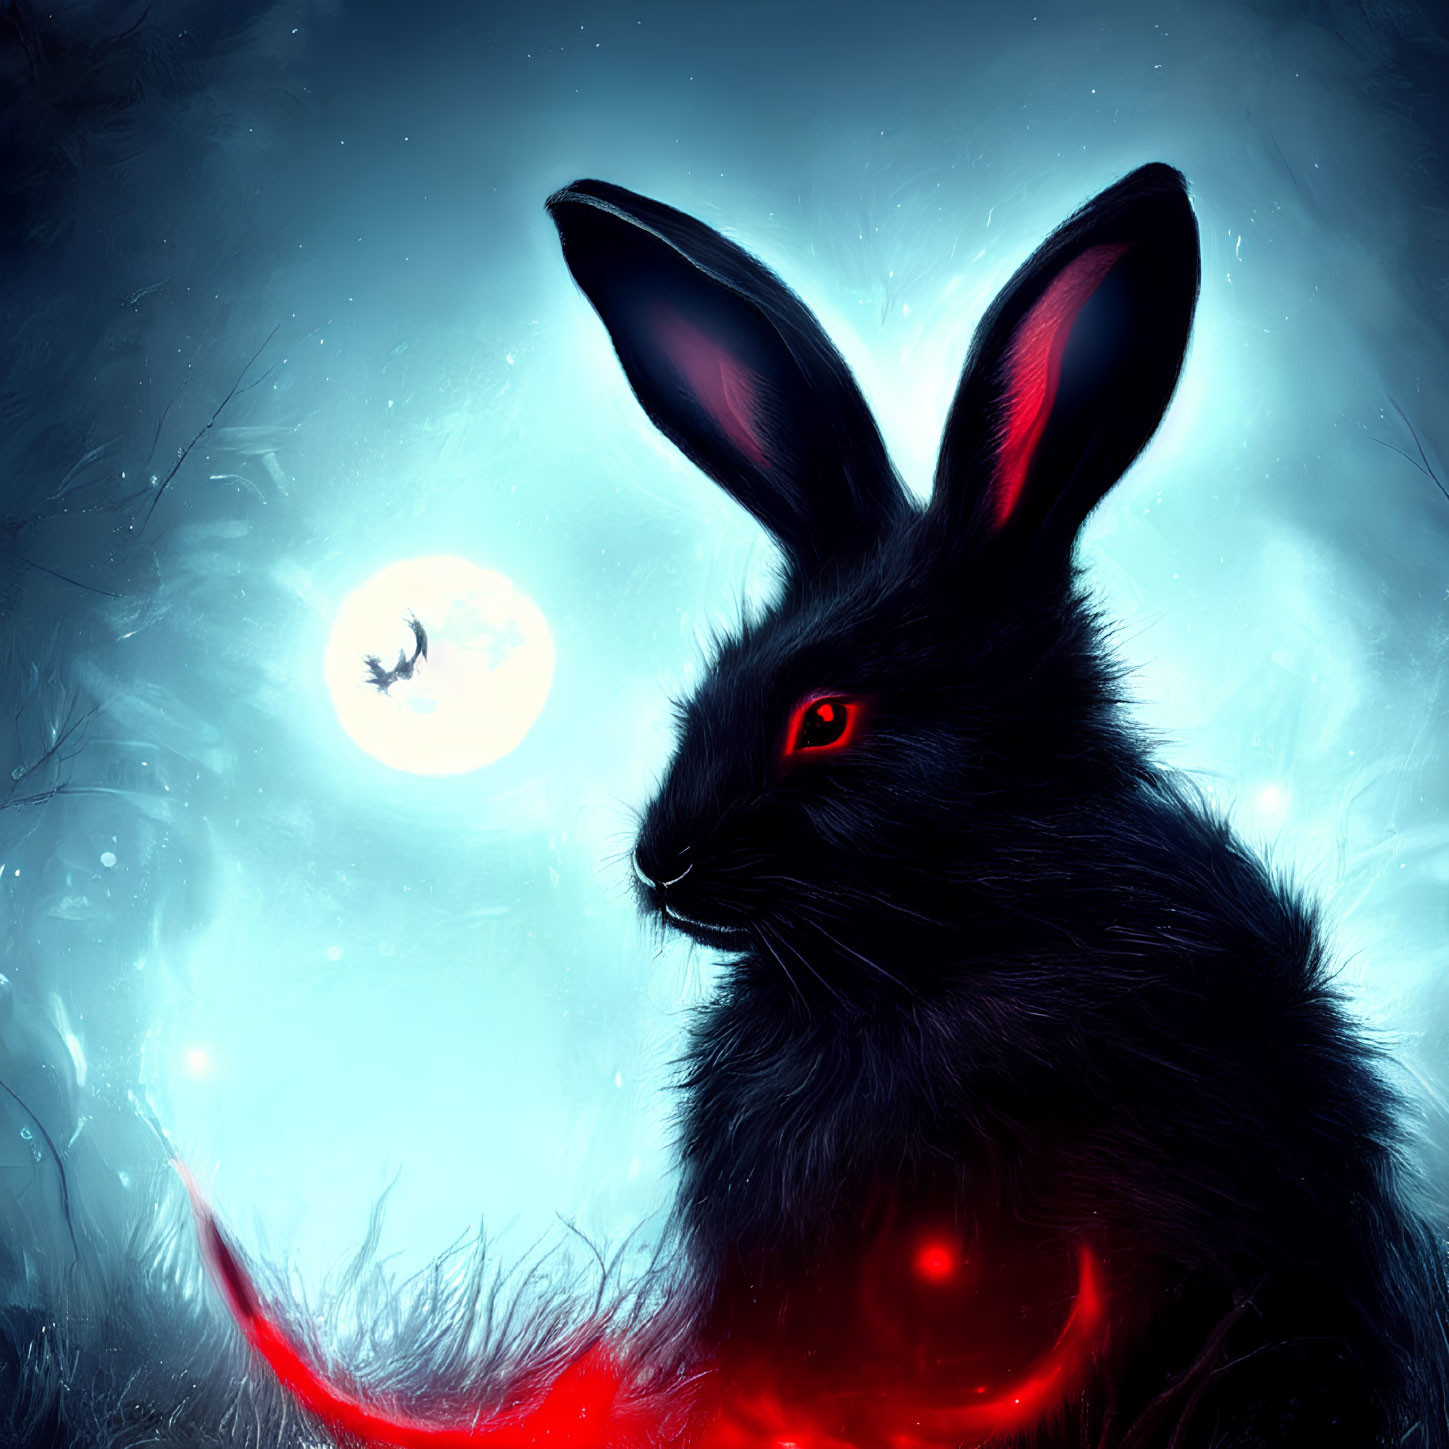 Mystical black rabbit and flying witch under moonlit sky